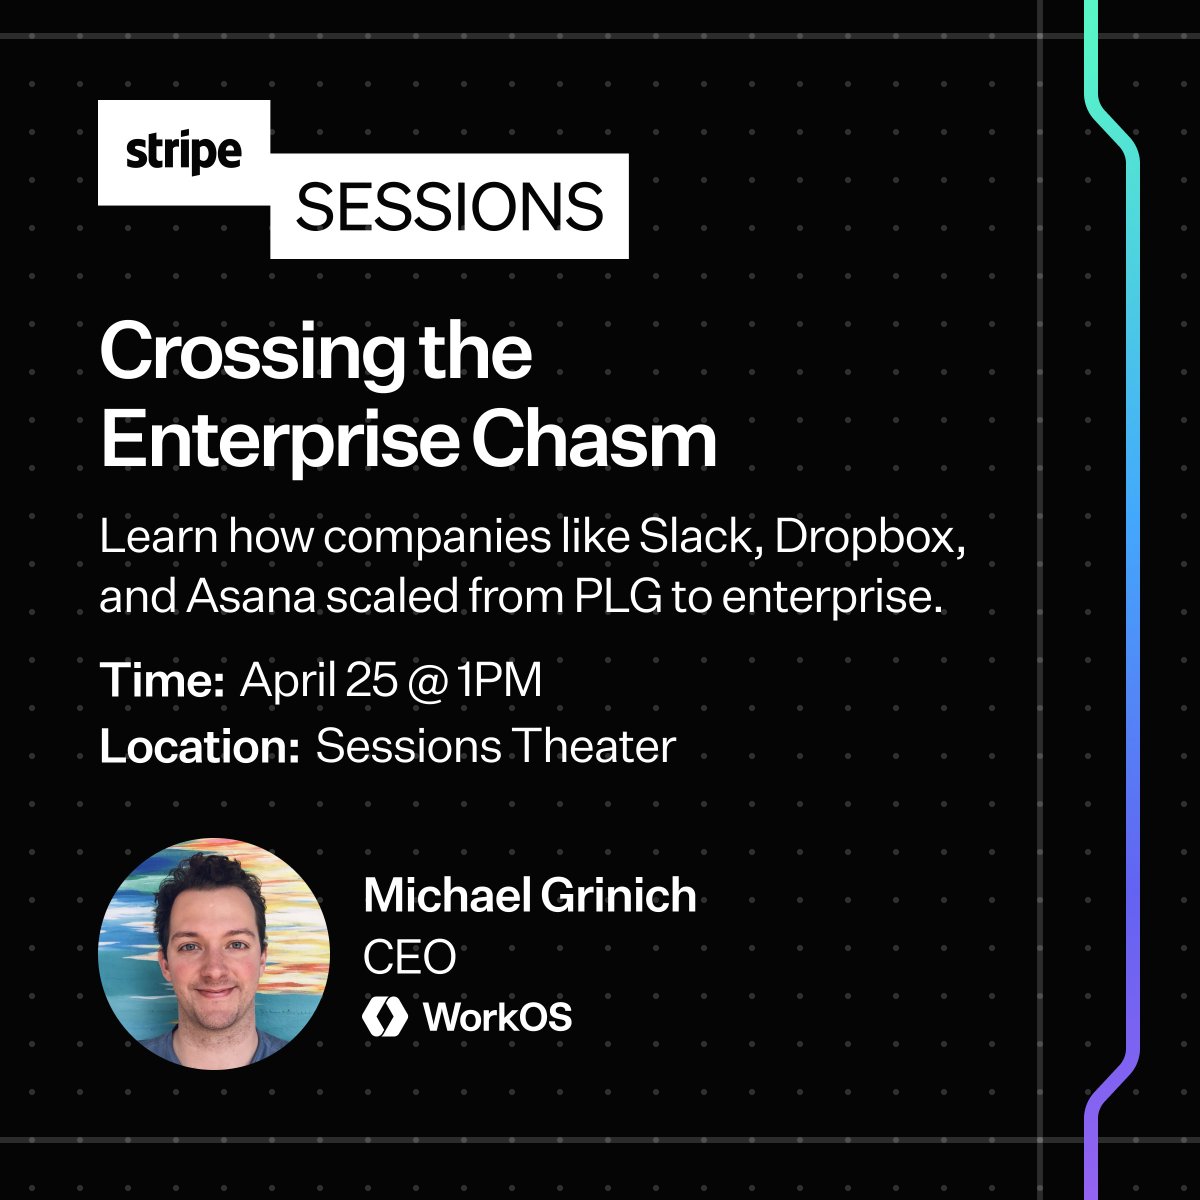 What do companies like Slack, Dropbox, & Asana all have in common? They began as PLG and eventually scaled to enterprise. But how? Join @grinich at Stripe Sessions next Thursday as he shares proven strategies & tactics for making your app Enterprise Ready.